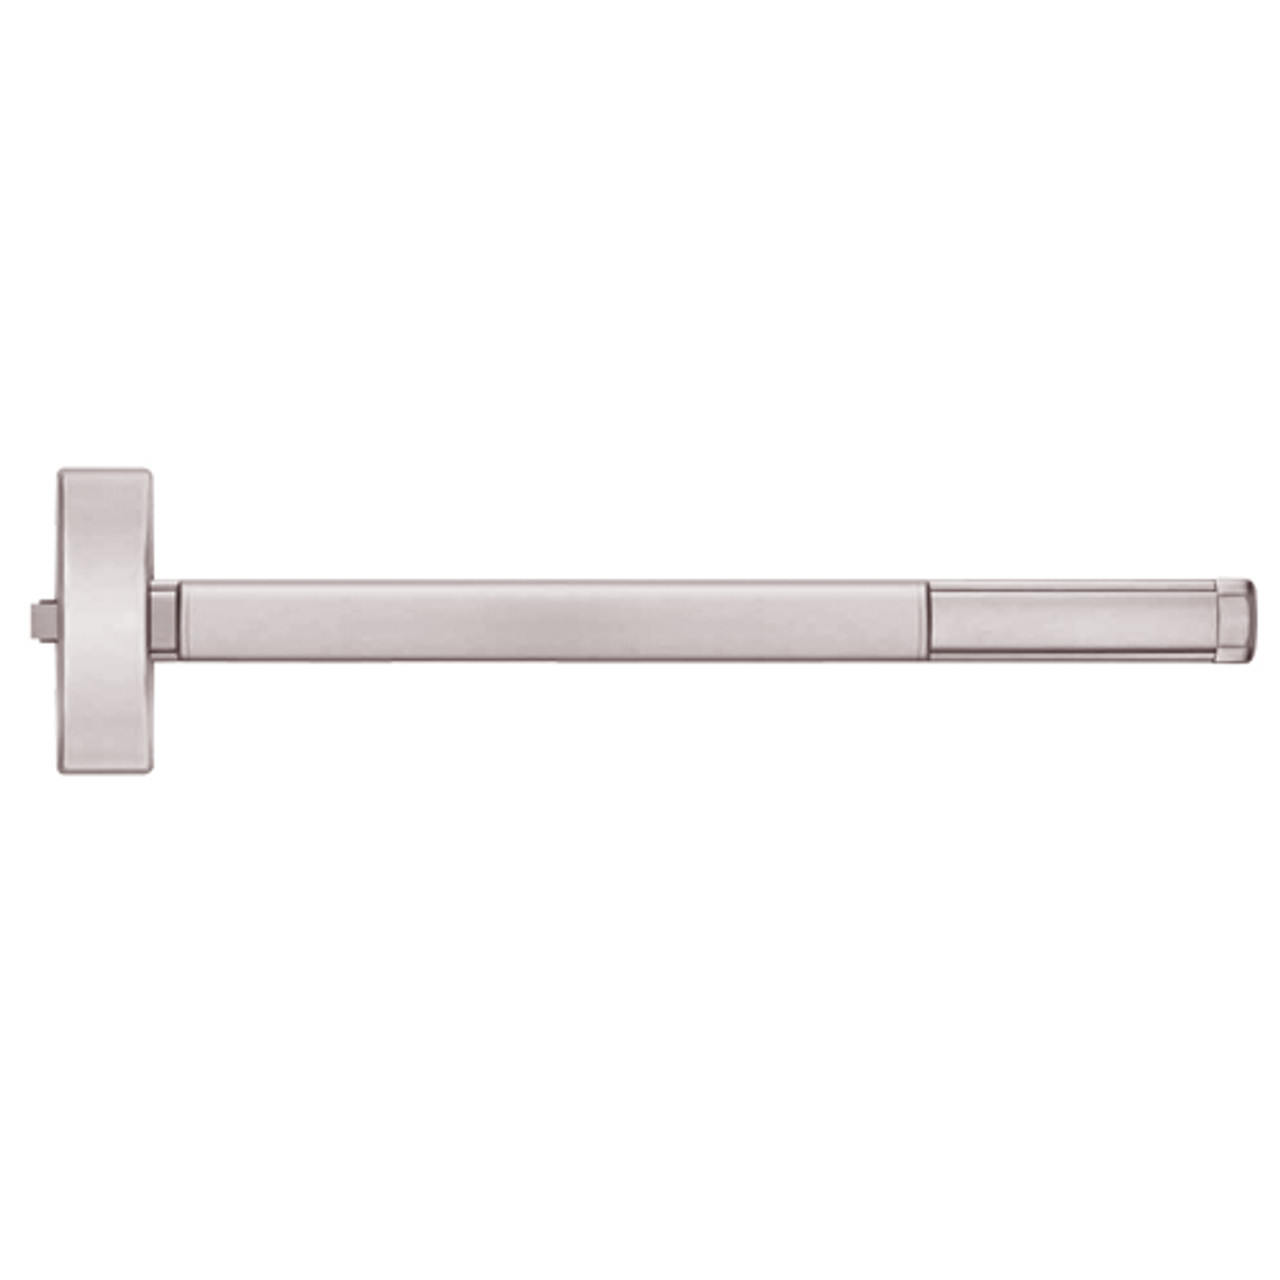 MLRFL2102-628-48 PHI 2100 Series Fire Rated Apex Rim Exit Device with Motorized Latch Retraction Prepped for Dummy Trim in Satin Aluminum Finish